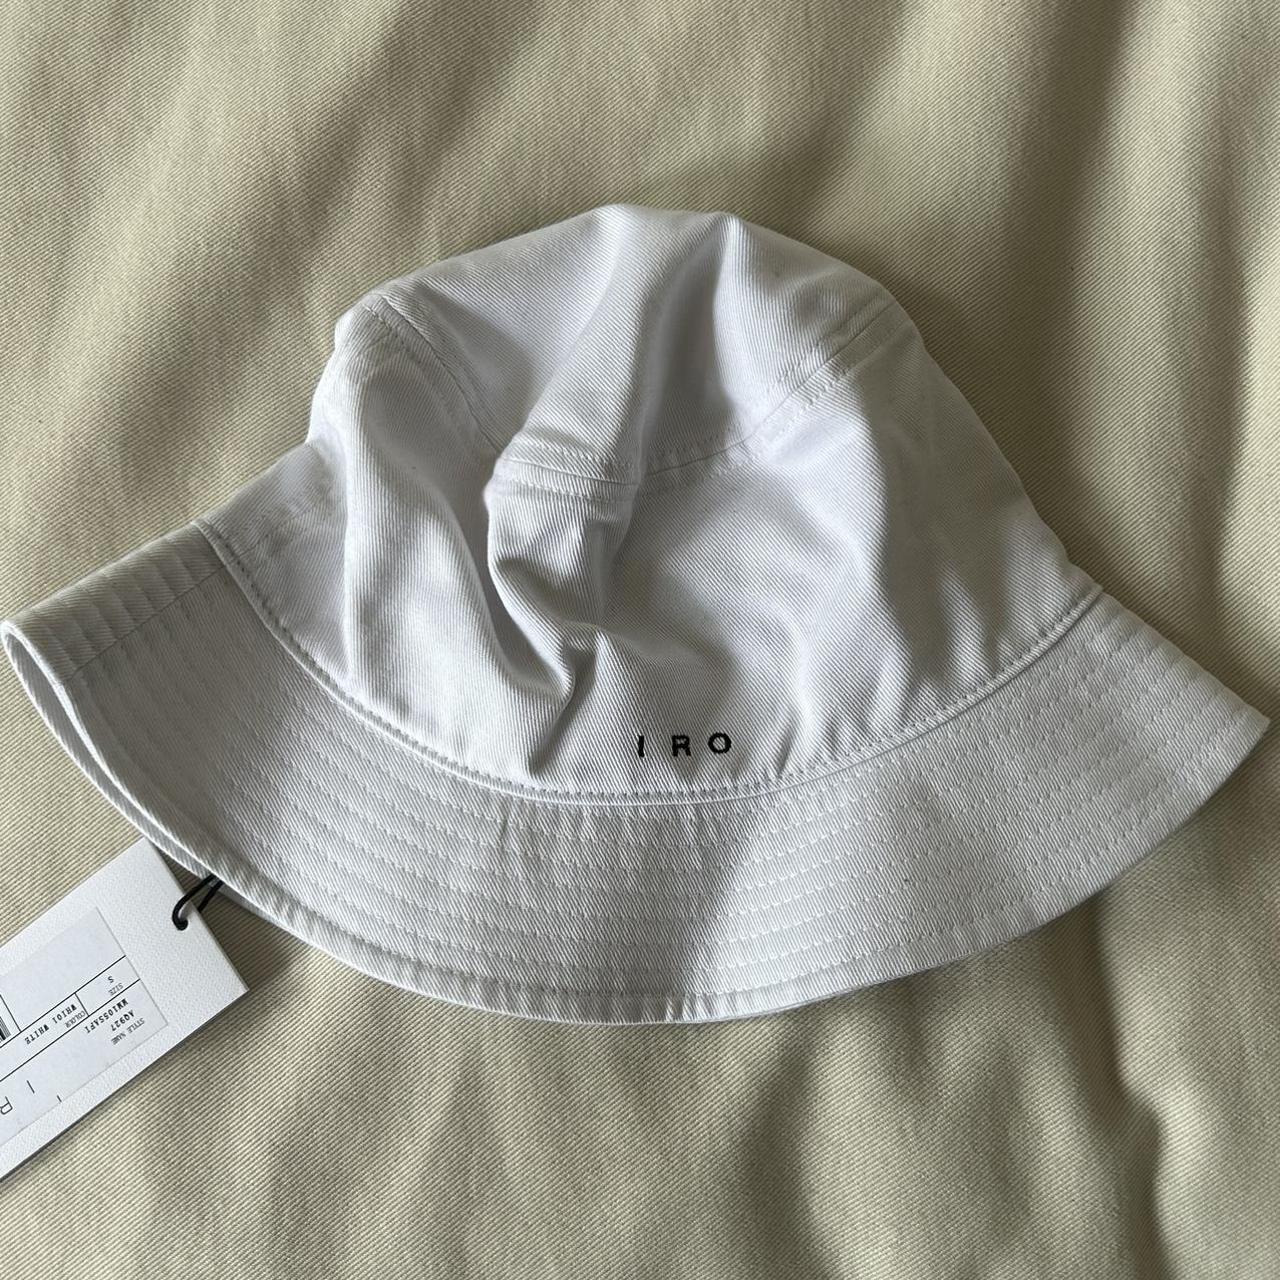 IRO bucket hat, never worn, tags attached. NO PAYPAL - Depop